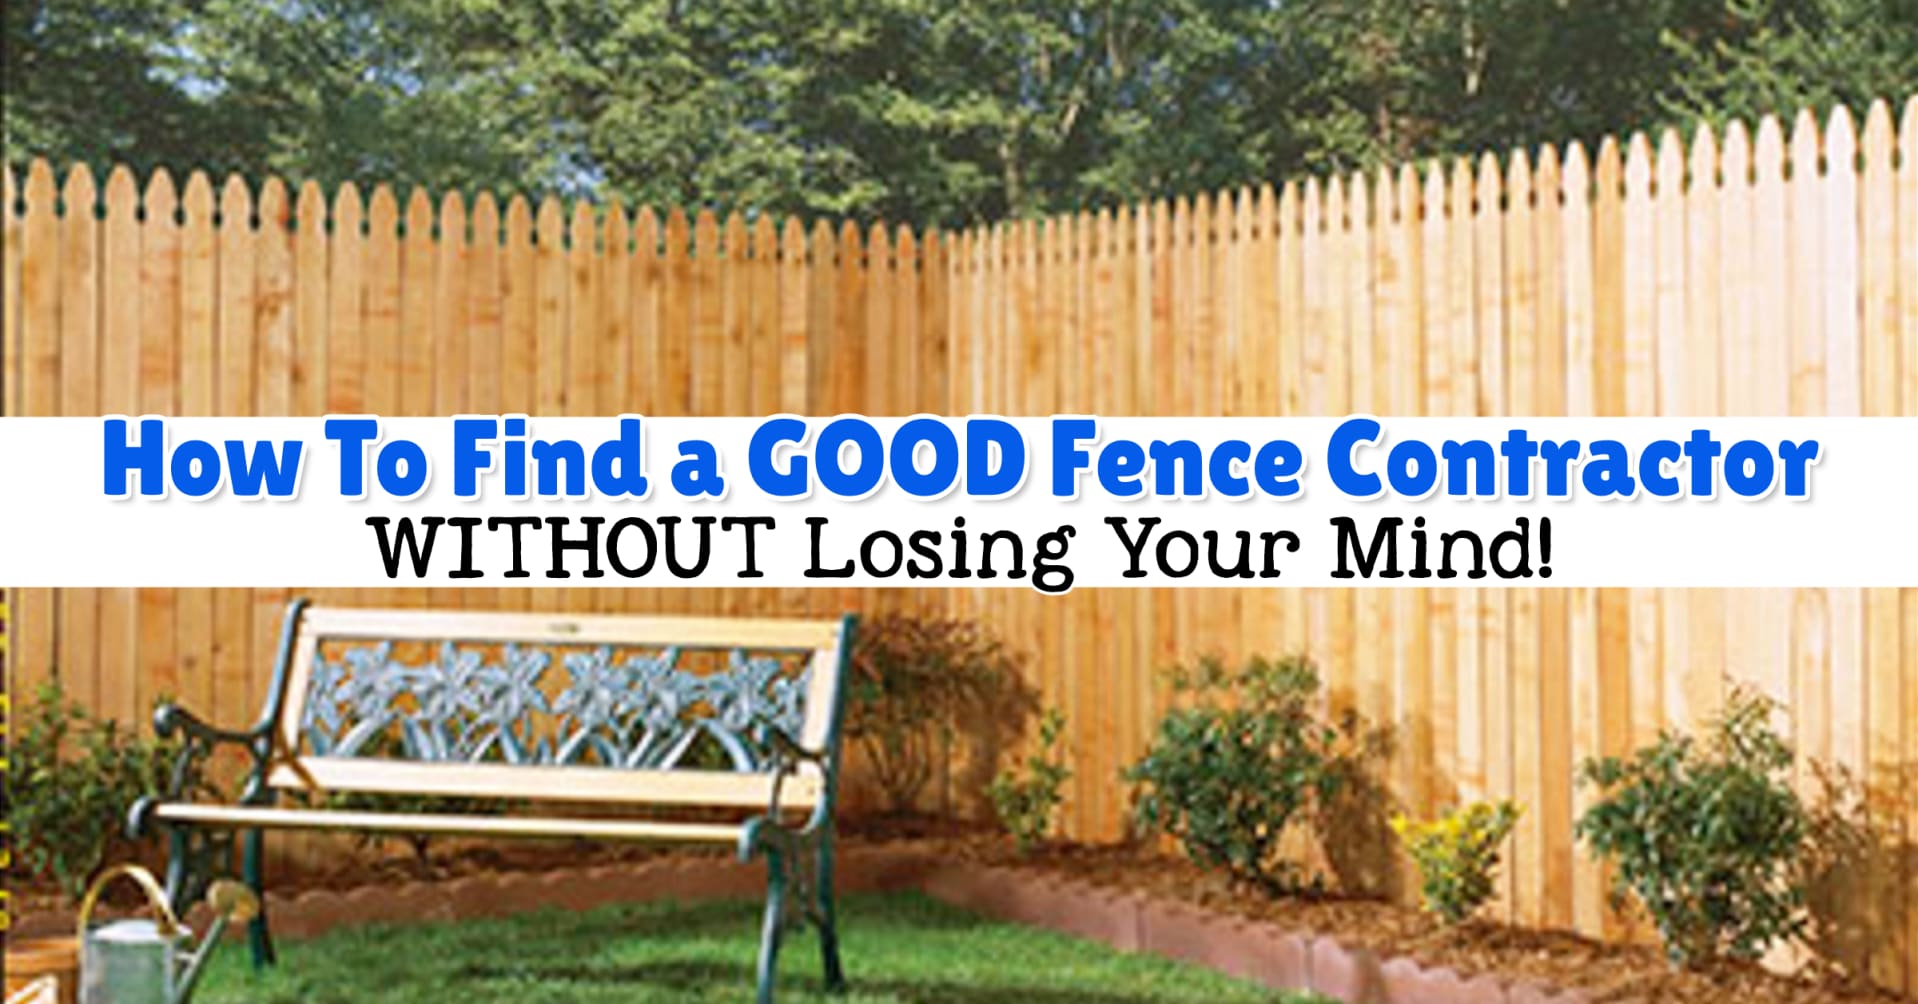 Fence Contractors – How To Hire a Local Fence Installer - How To Find a GOOD Fence Contractor - fence companies near me - questions to ask a fence contractor - fence companies in the area - commerical contractors near me - garden fencing contractors near me - vinyl fence installation companies - home fence contractors - yard fencing contractors - house fence installation - fence builders around me - fence installation contractors